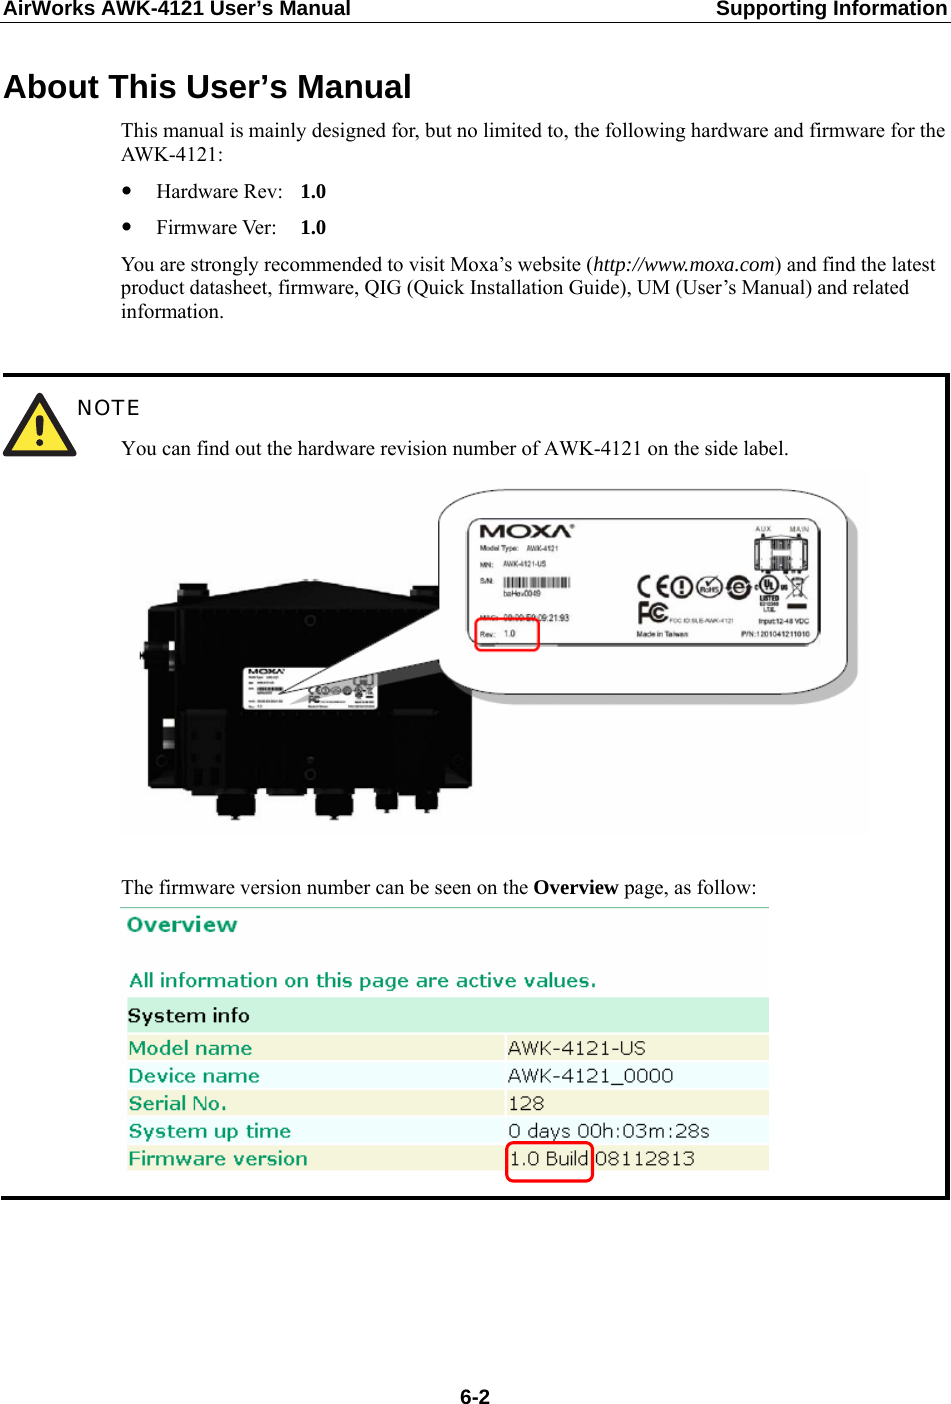 AirWorks AWK-4121 User’s Manual  Supporting Information About This User’s Manual This manual is mainly designed for, but no limited to, the following hardware and firmware for the AWK-4121: y Hardware Rev:   1.0 y Firmware Ver:    1.0 You are strongly recommended to visit Moxa’s website (http://www.moxa.com) and find the latest product datasheet, firmware, QIG (Quick Installation Guide), UM (User’s Manual) and related information.   NOTE You can find out the hardware revision number of AWK-4121 on the side label.   The firmware version number can be seen on the Overview page, as follow:       6-2